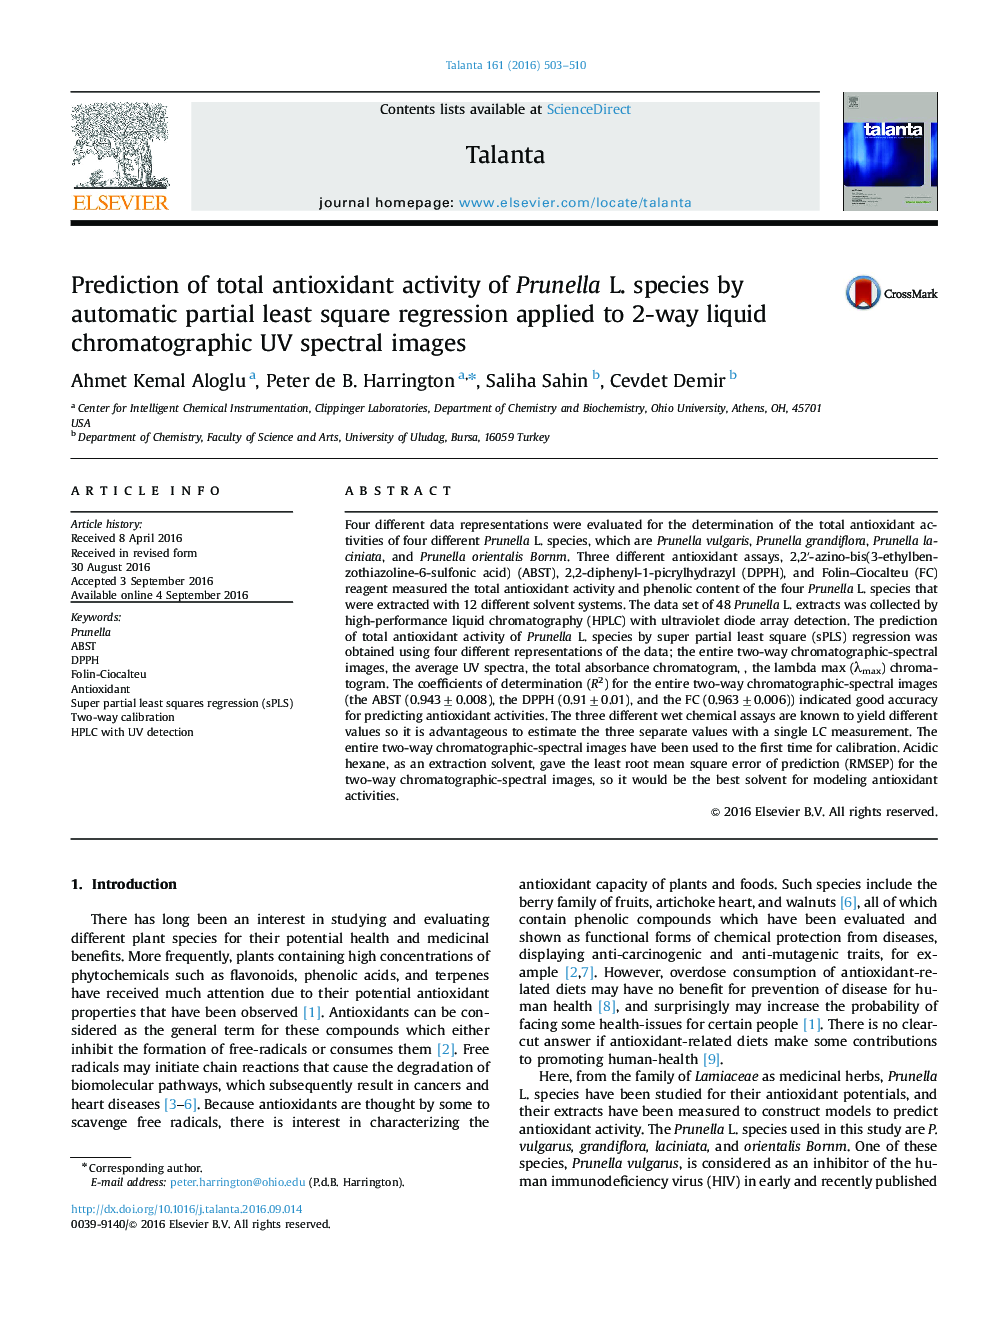 Prediction of total antioxidant activity of Prunella L. species by automatic partial least square regression applied to 2-way liquid chromatographic UV spectral images